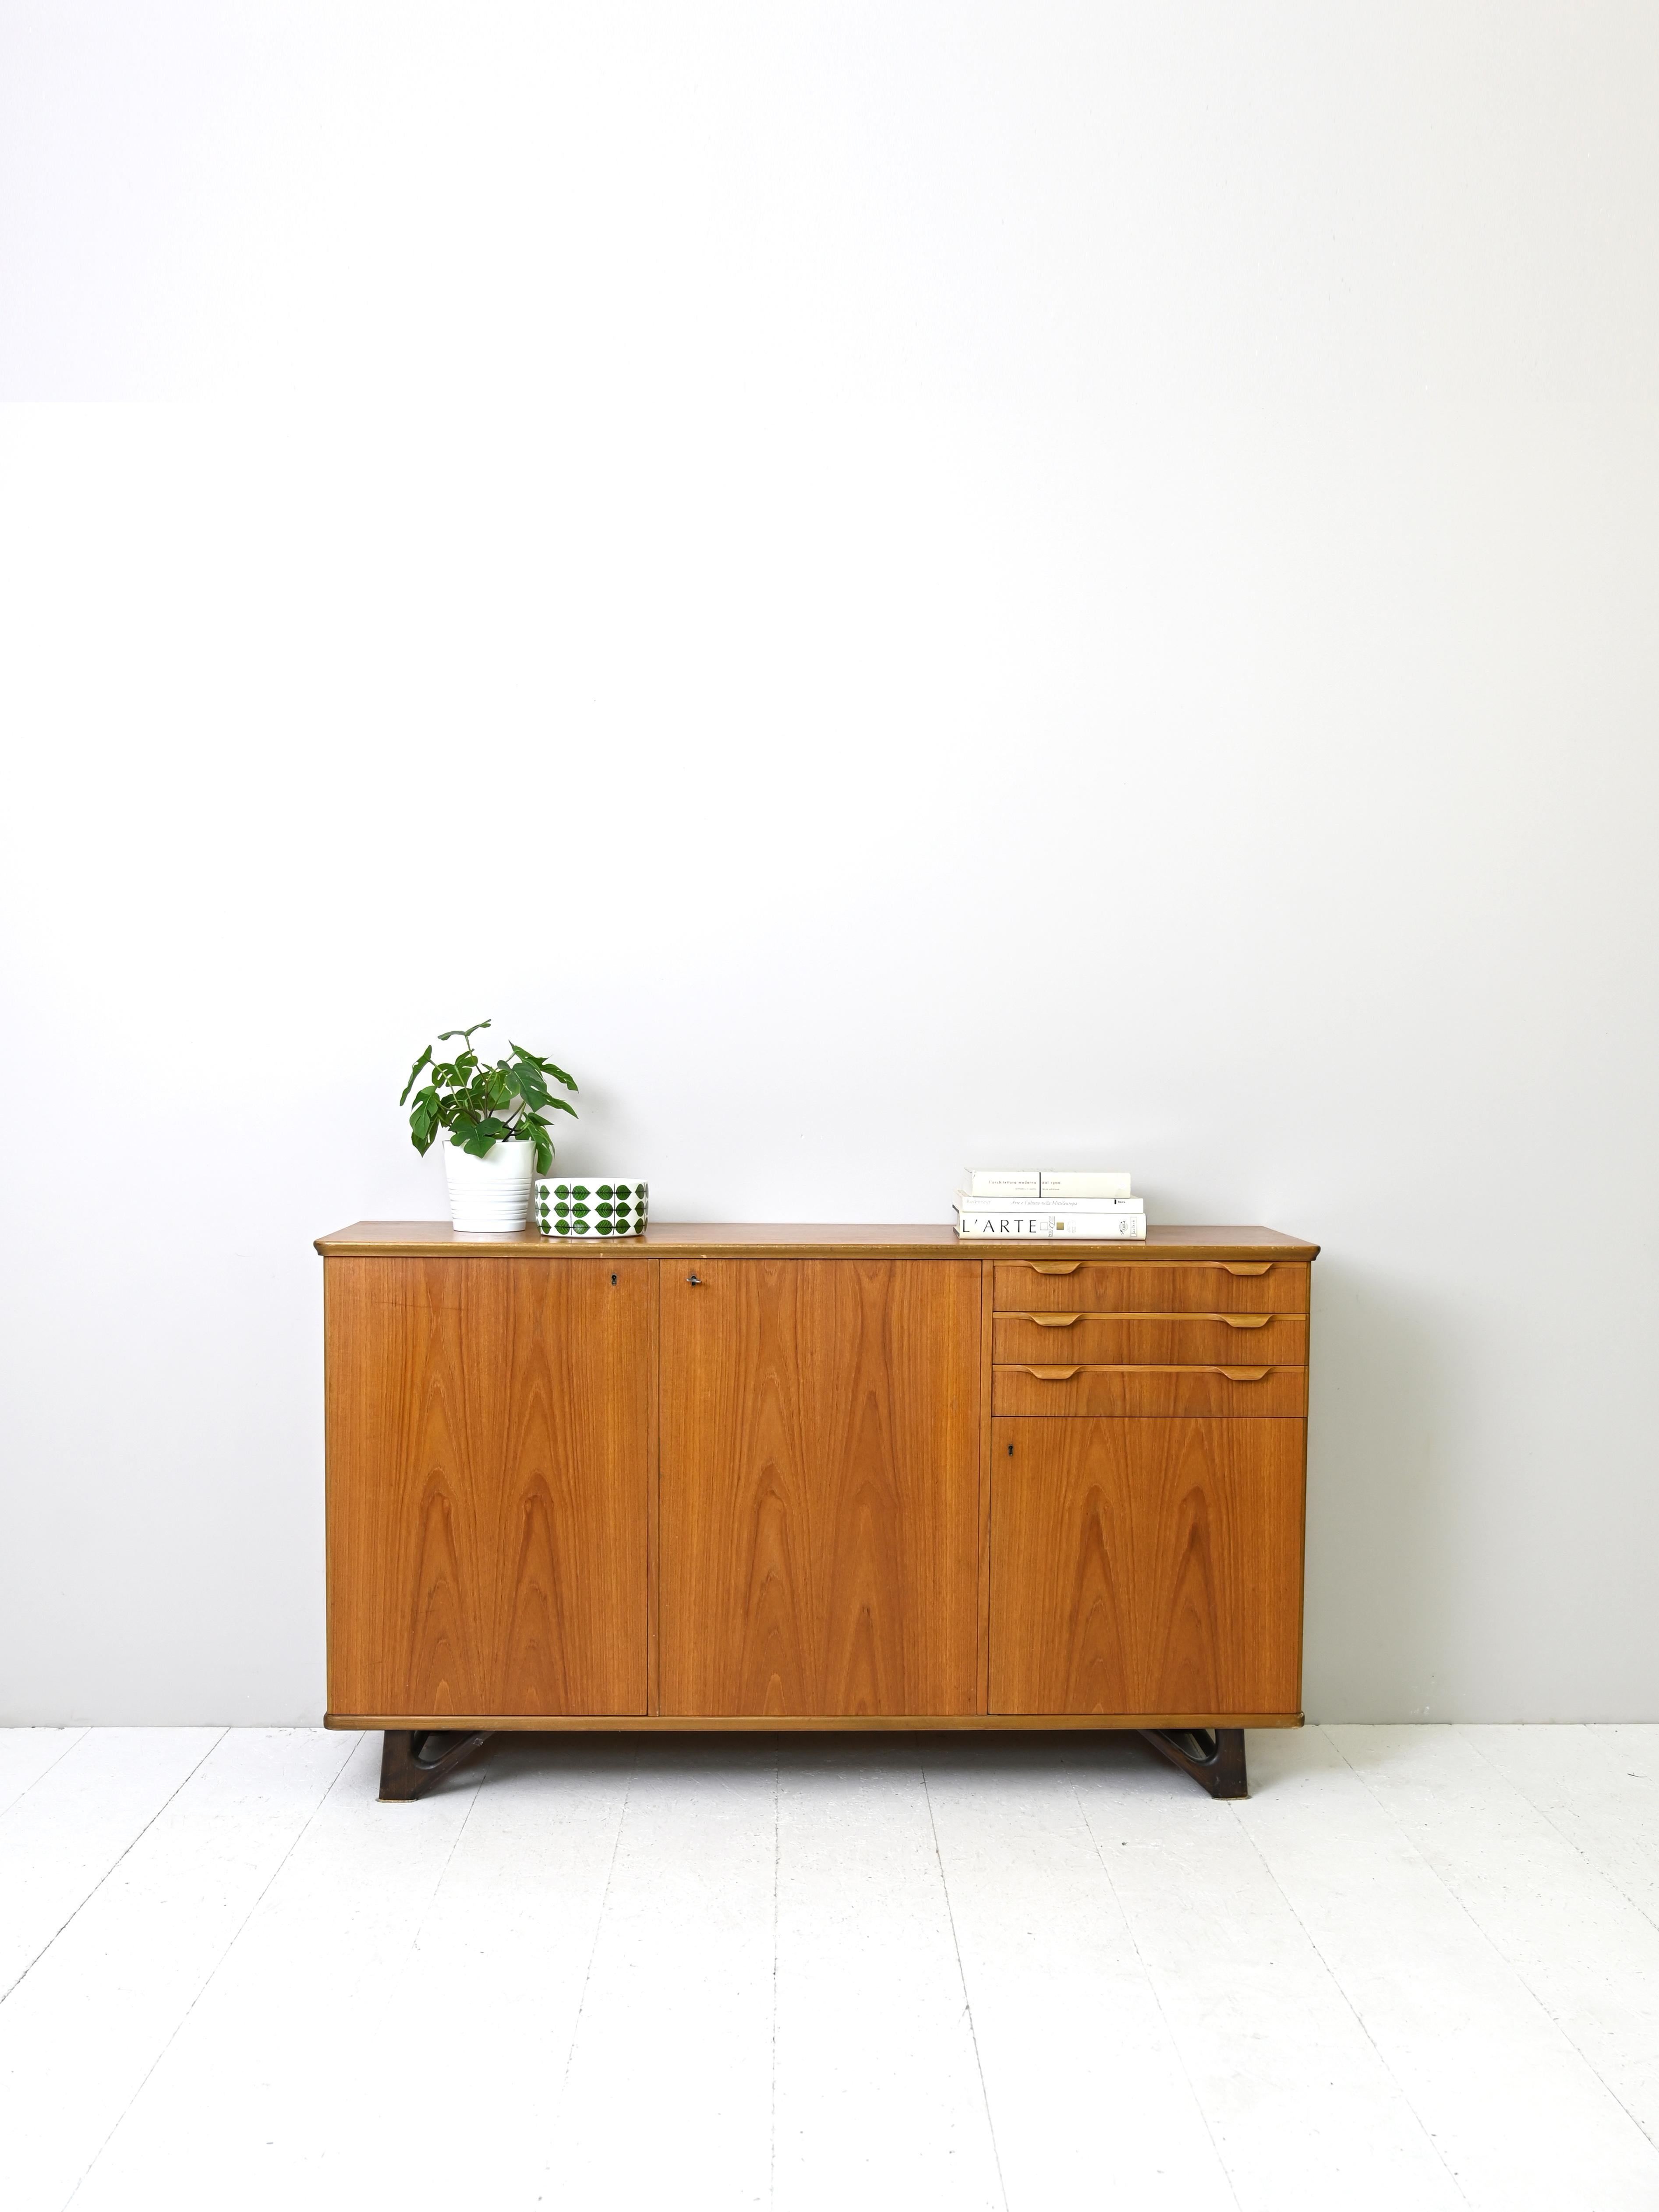 Vintage sideboard of Scandinavian manufacture with three drawers.

A capacious piece of furniture with a distinctive appearance. On one side is a storage compartment with hinged doors and on the other side are three drawers and a small space also